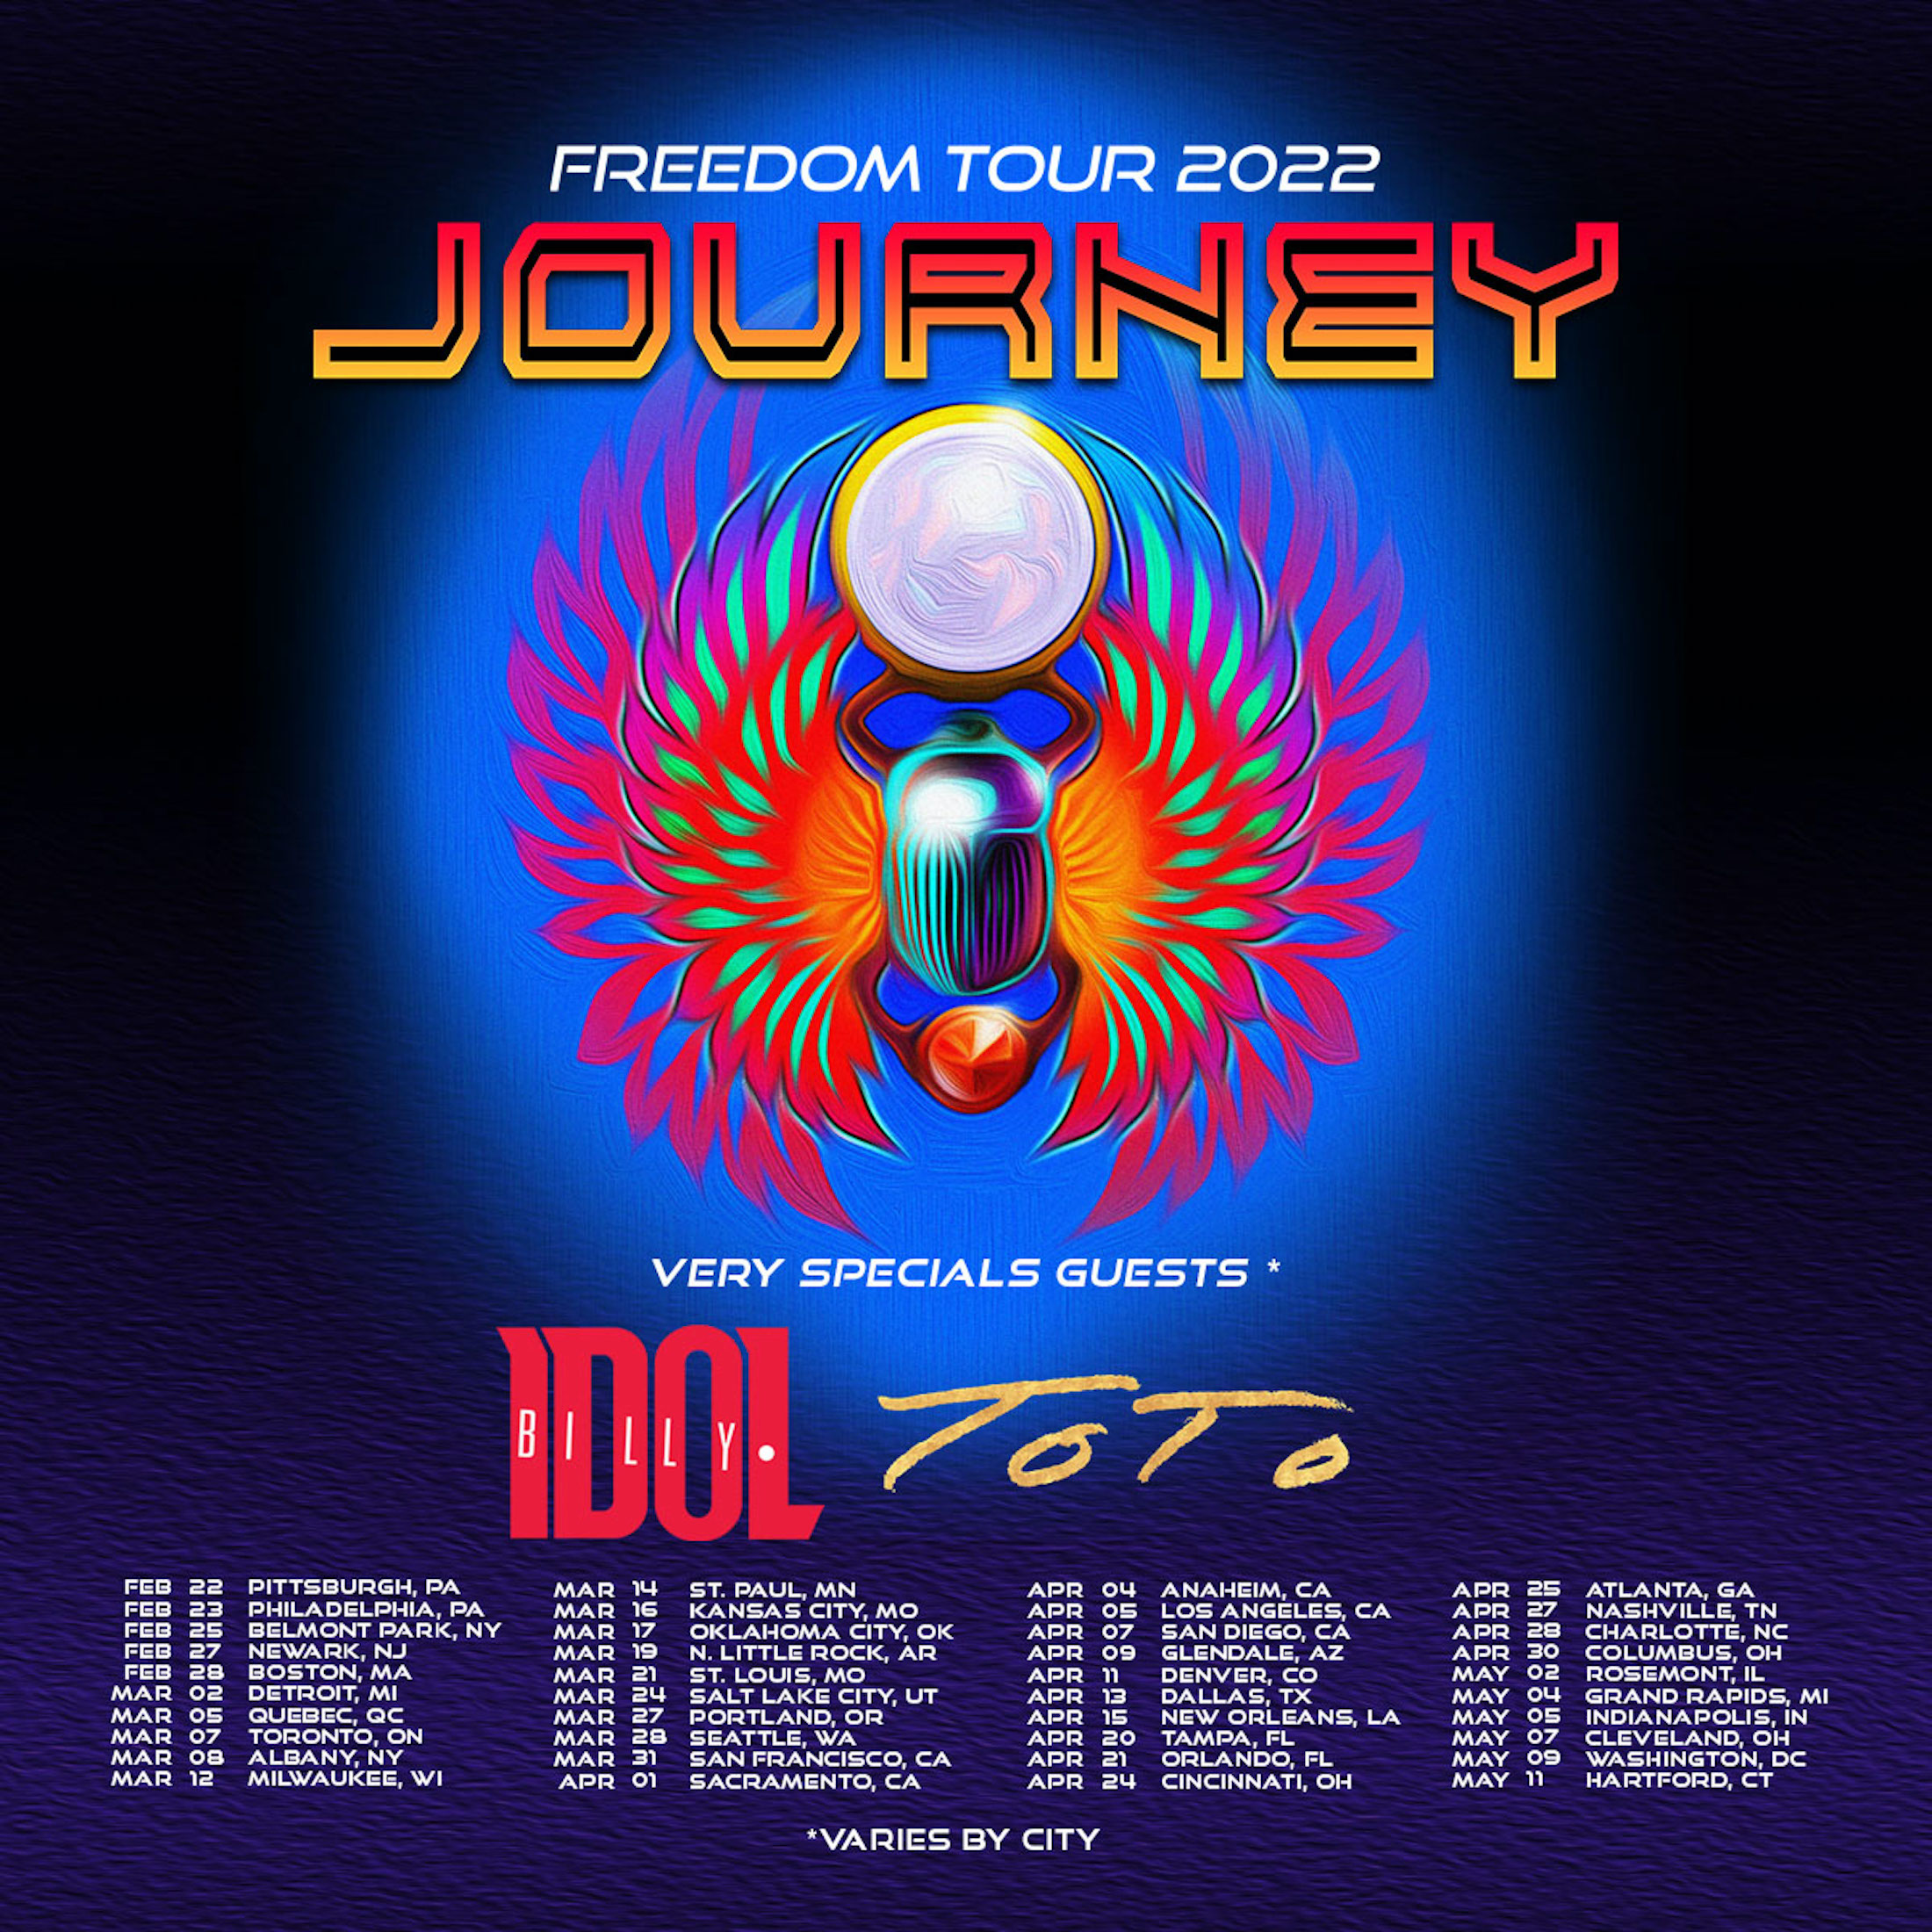 ROCK & ROLL HALL OF FAME LEGENDS JOURNEY ANNOUNCE FREEDOM TOUR 2022